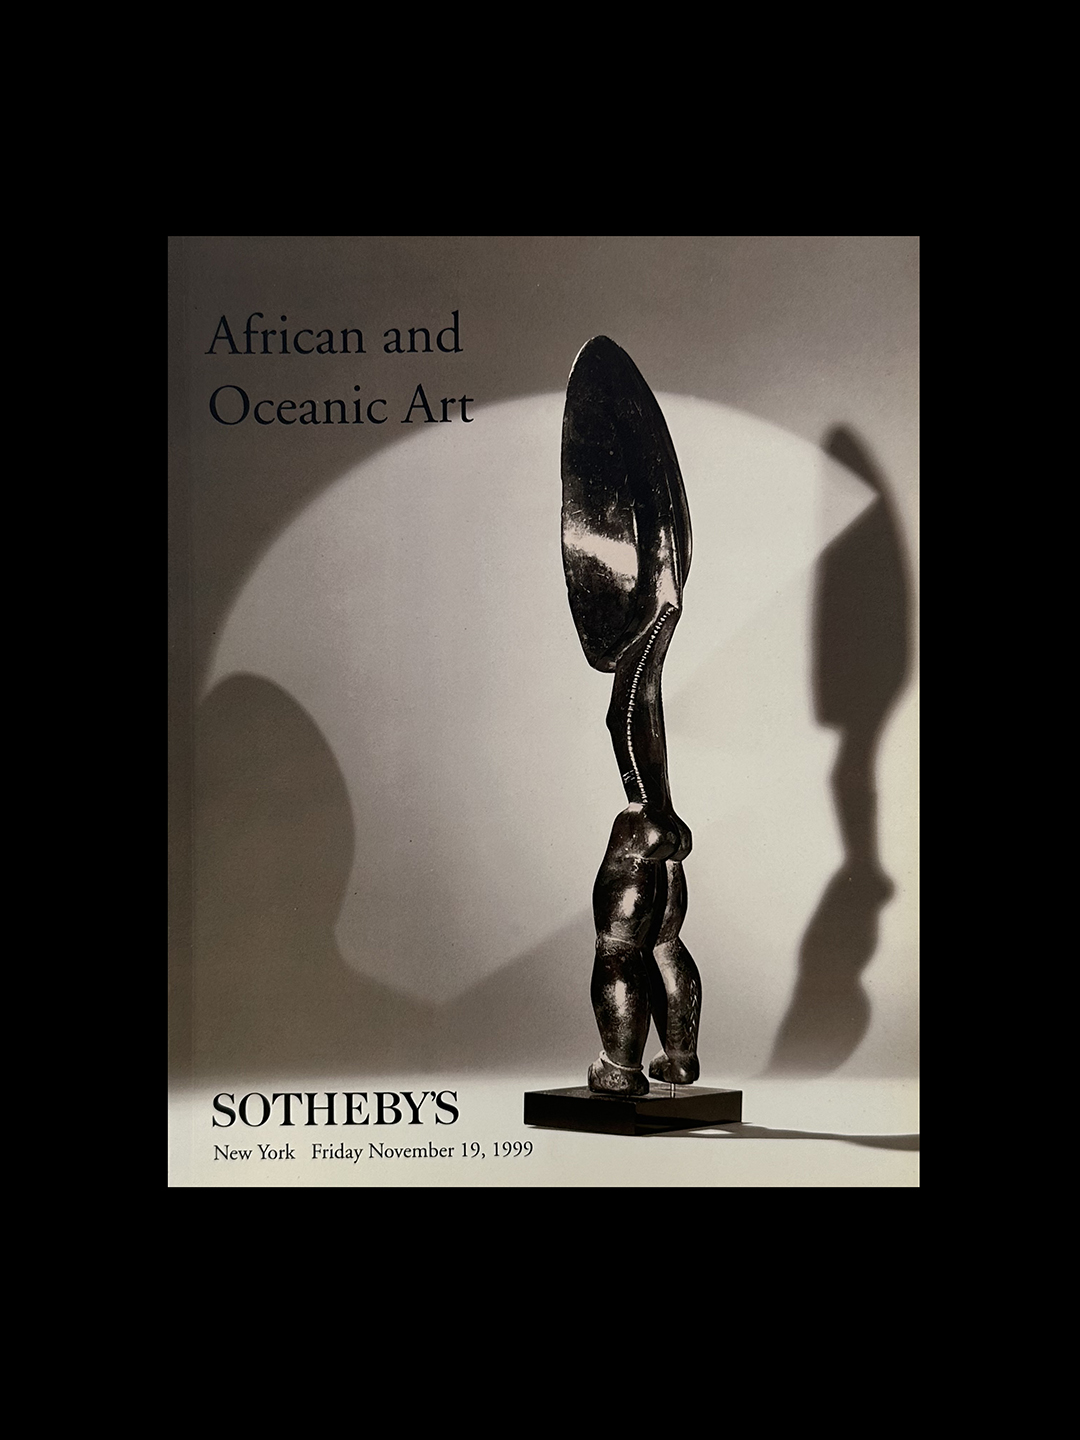 Sotheby's - African and Oceanic Art - New York, November, 1999